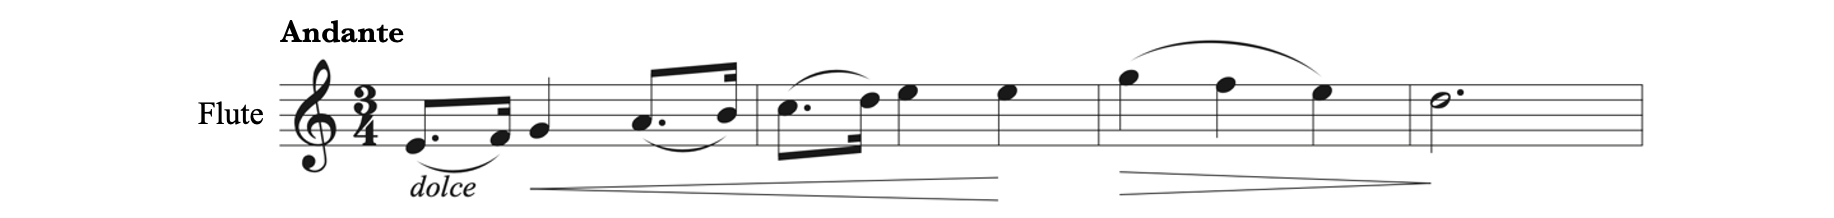 Flute line from Farrenk's Trio for Flute, Cello, and Piano, second movement - Andante. Listen to YouTube clip below.